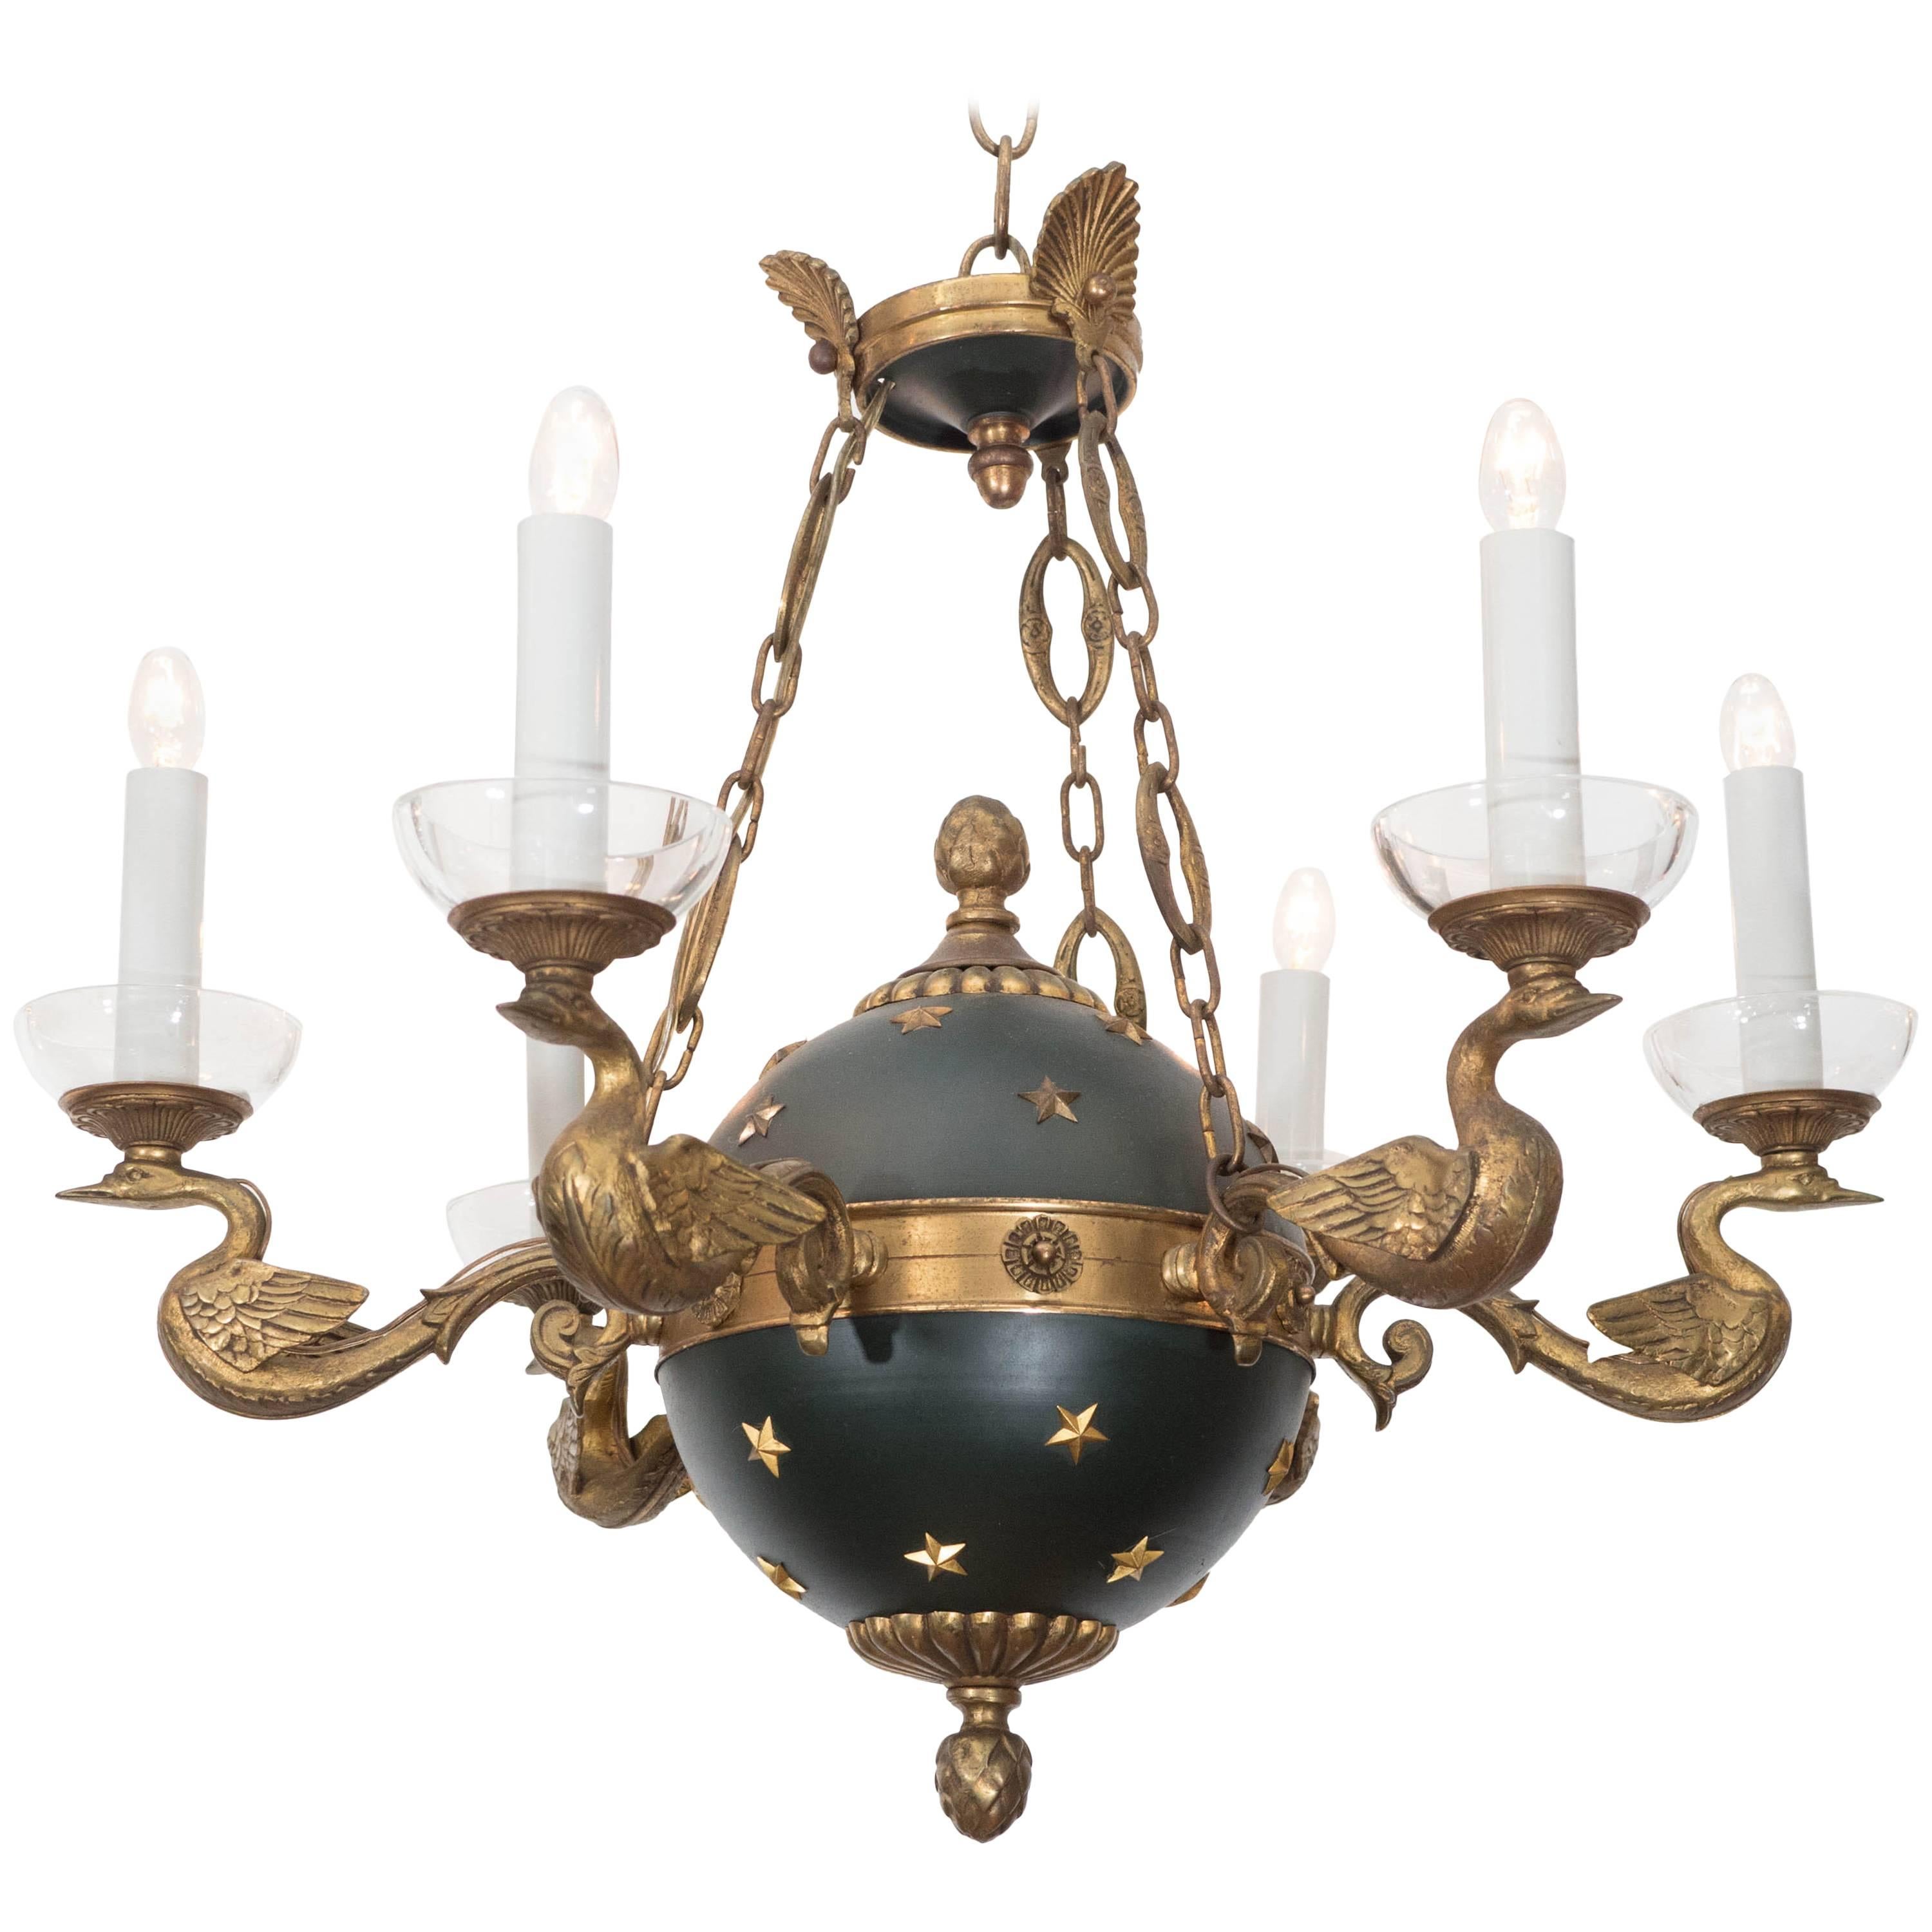 French Empire Style Chandelier with Celestial Globe and Swan Motif